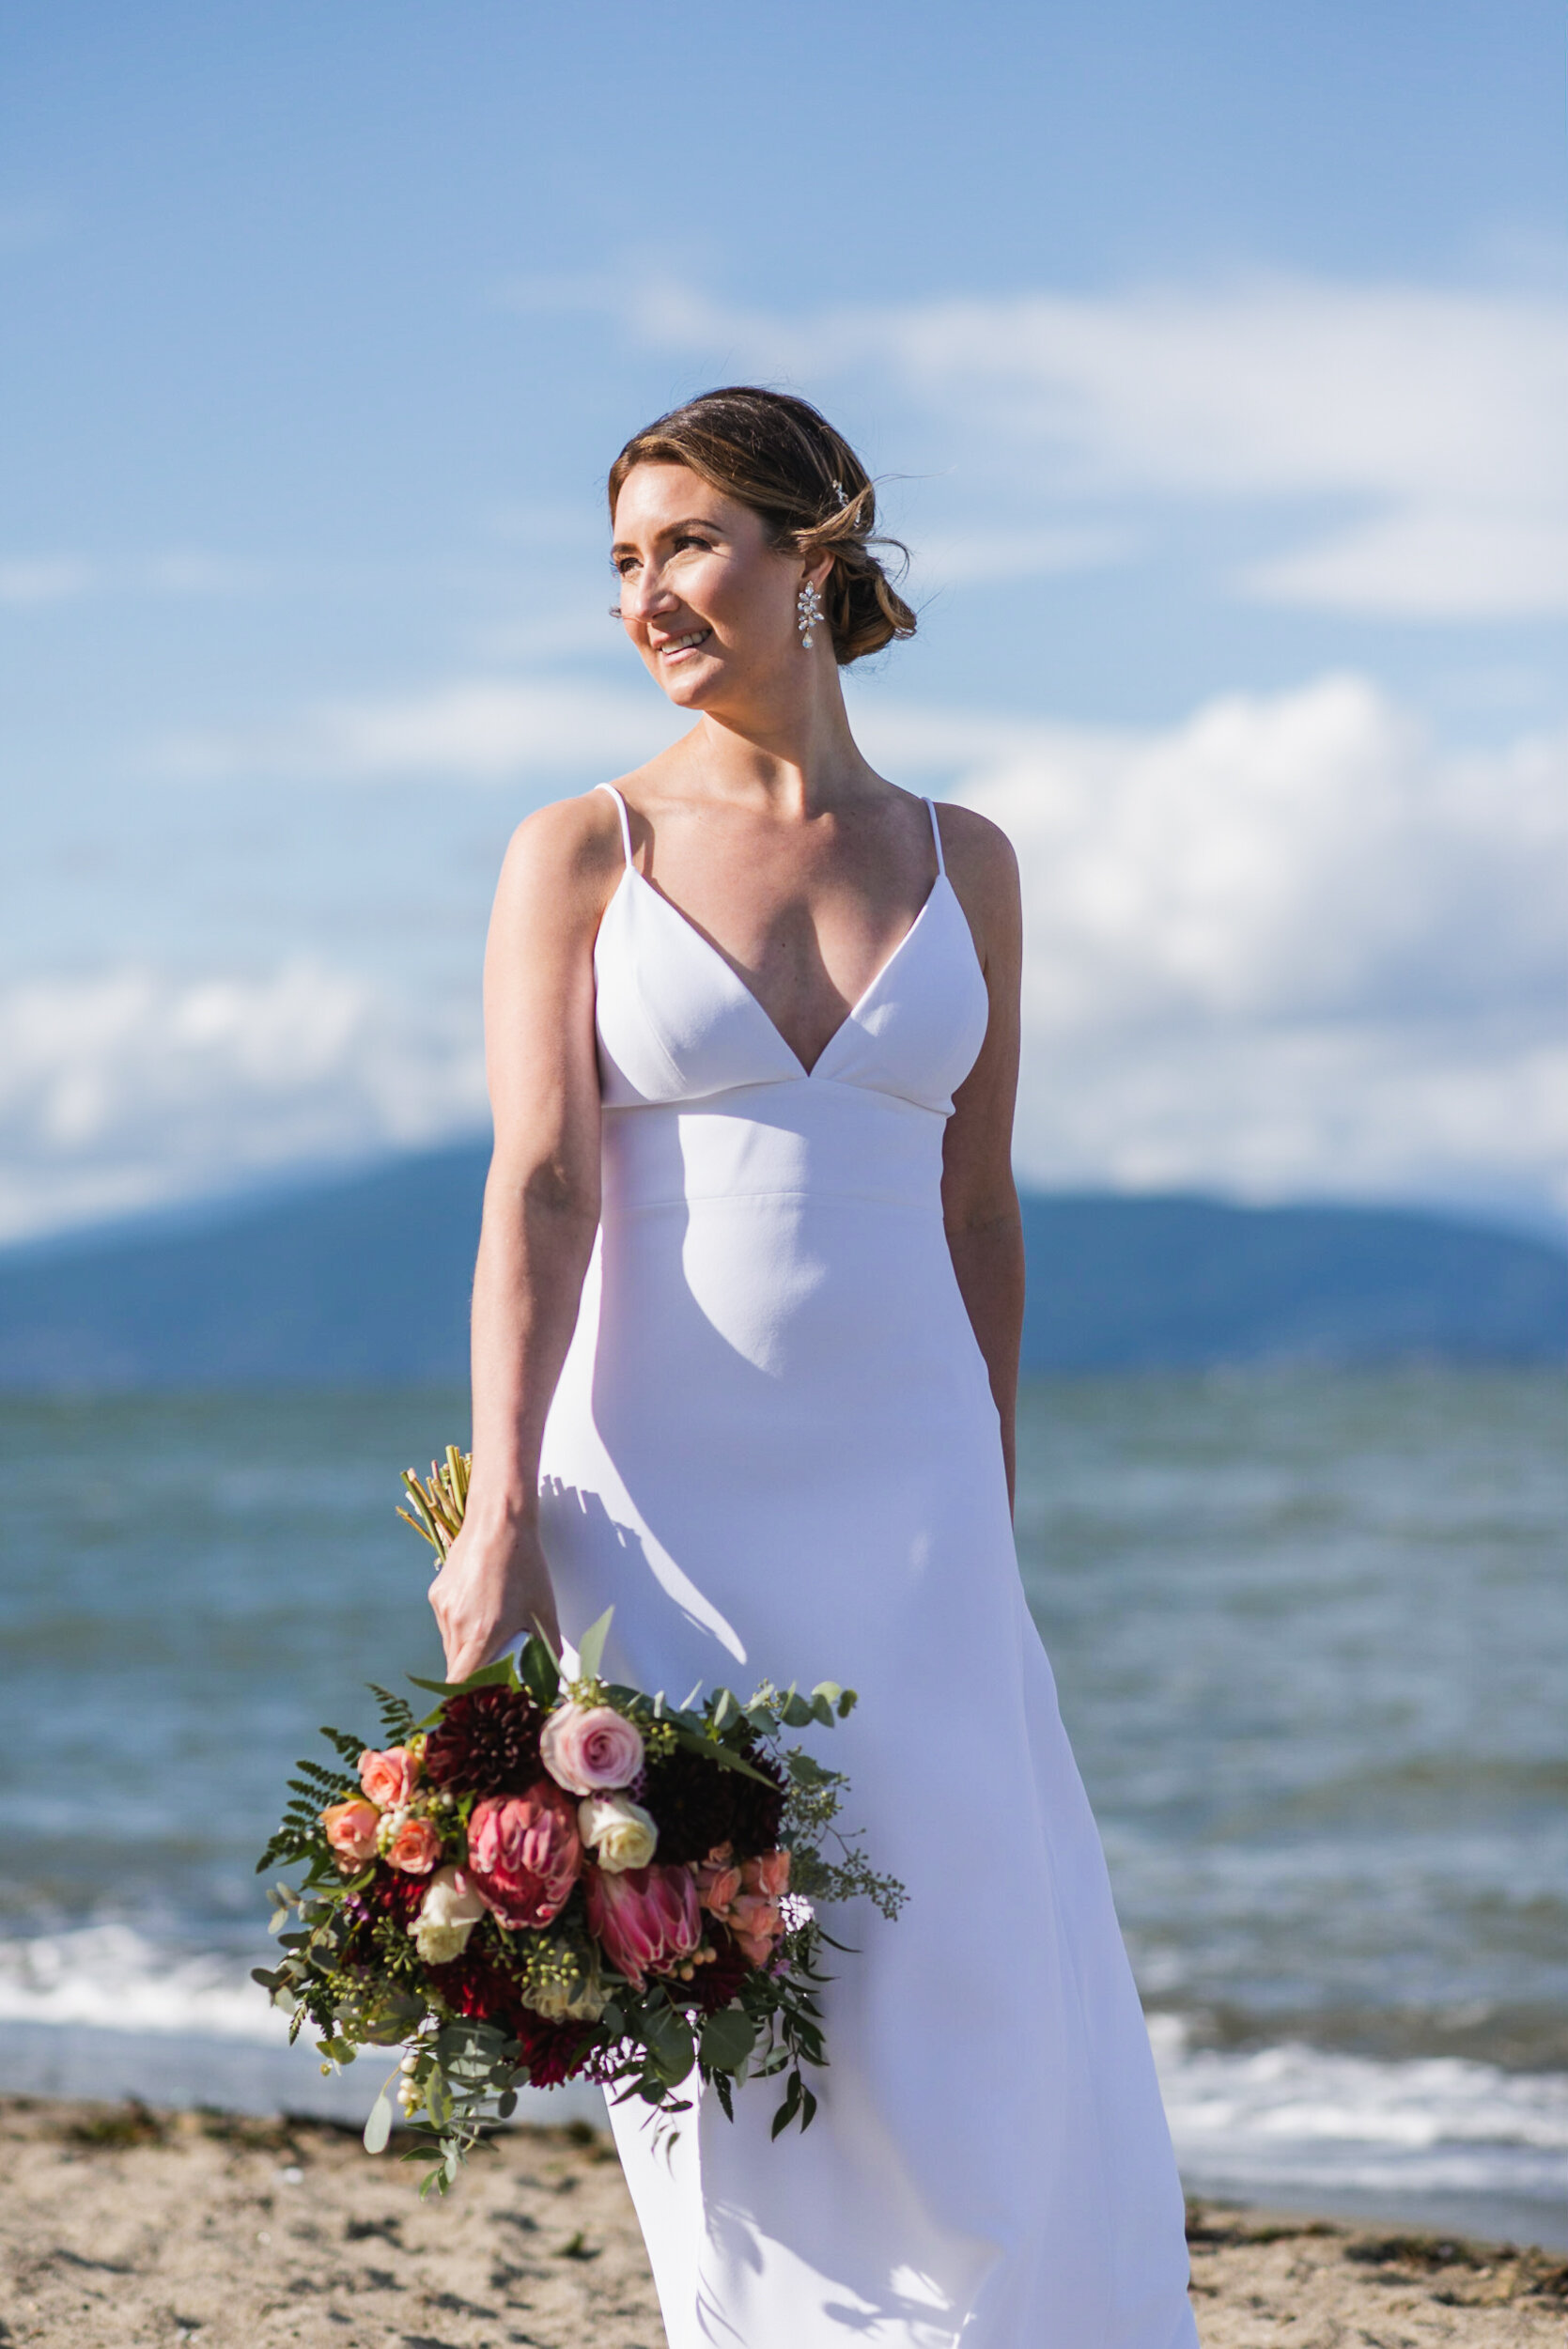 Bride standing at beach with mountains